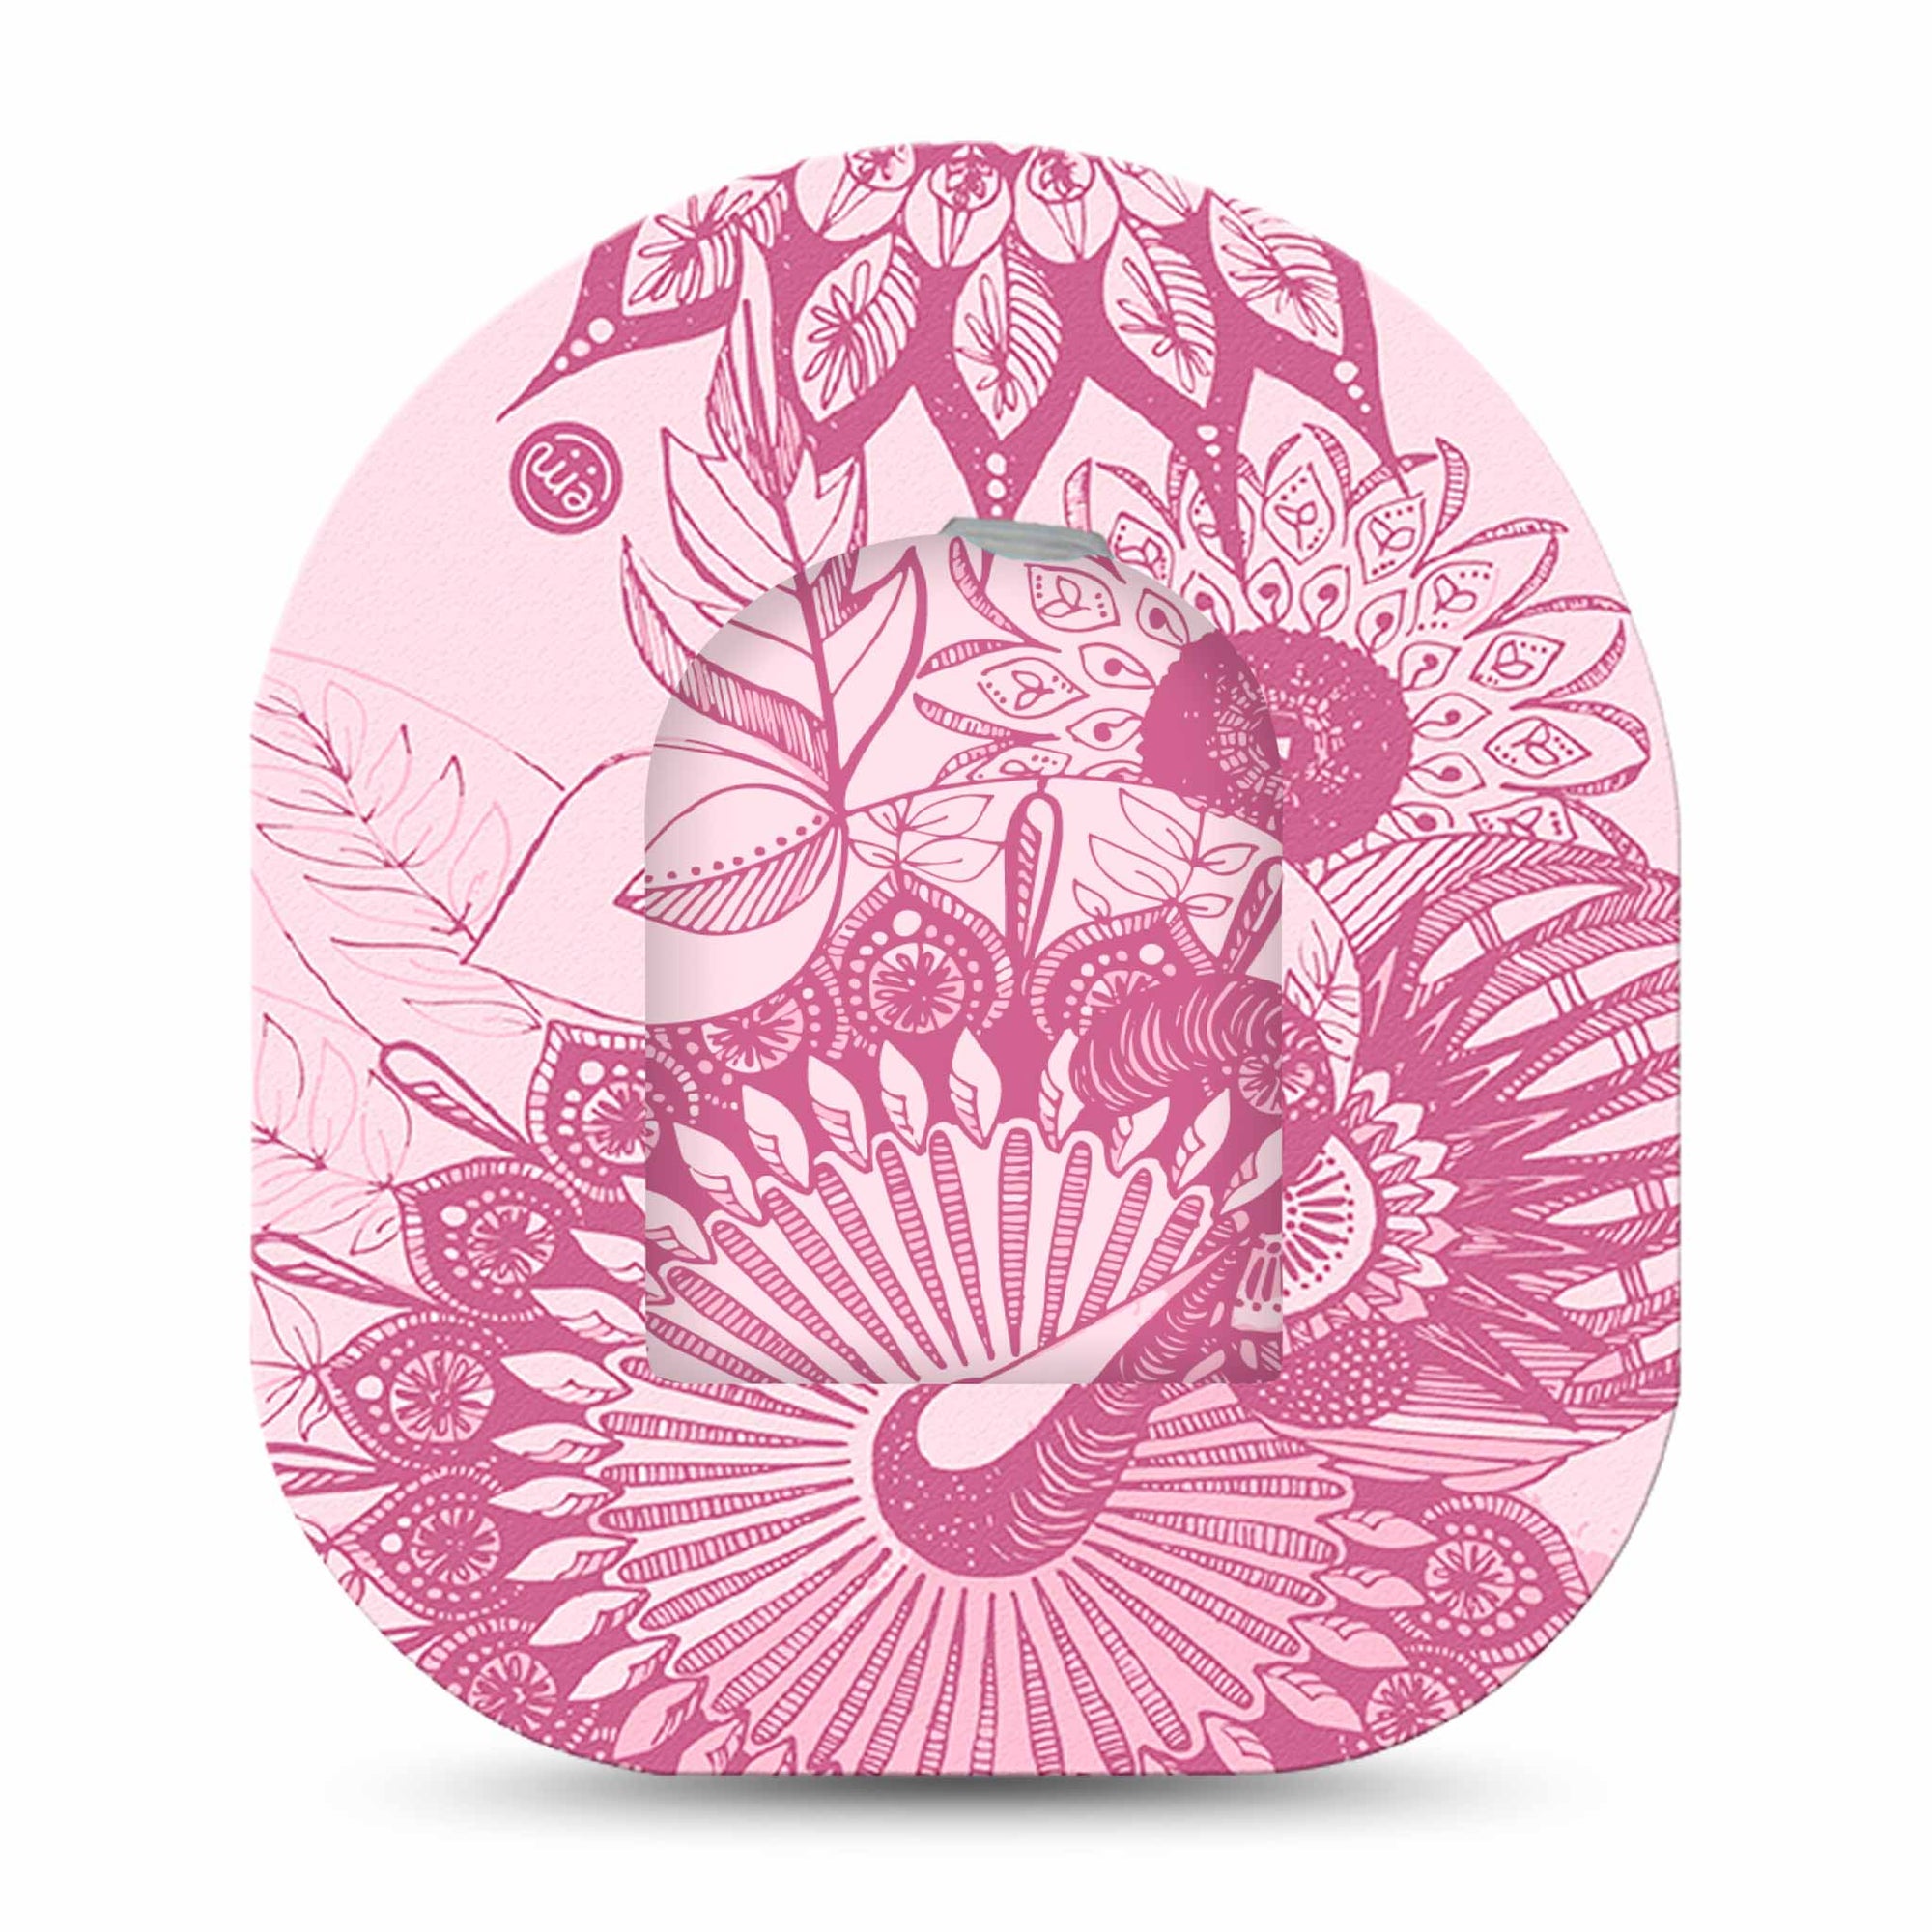 ExpressionMed Magenta Dani Omnipod Pump Sticker and Matching Omnipod Patch